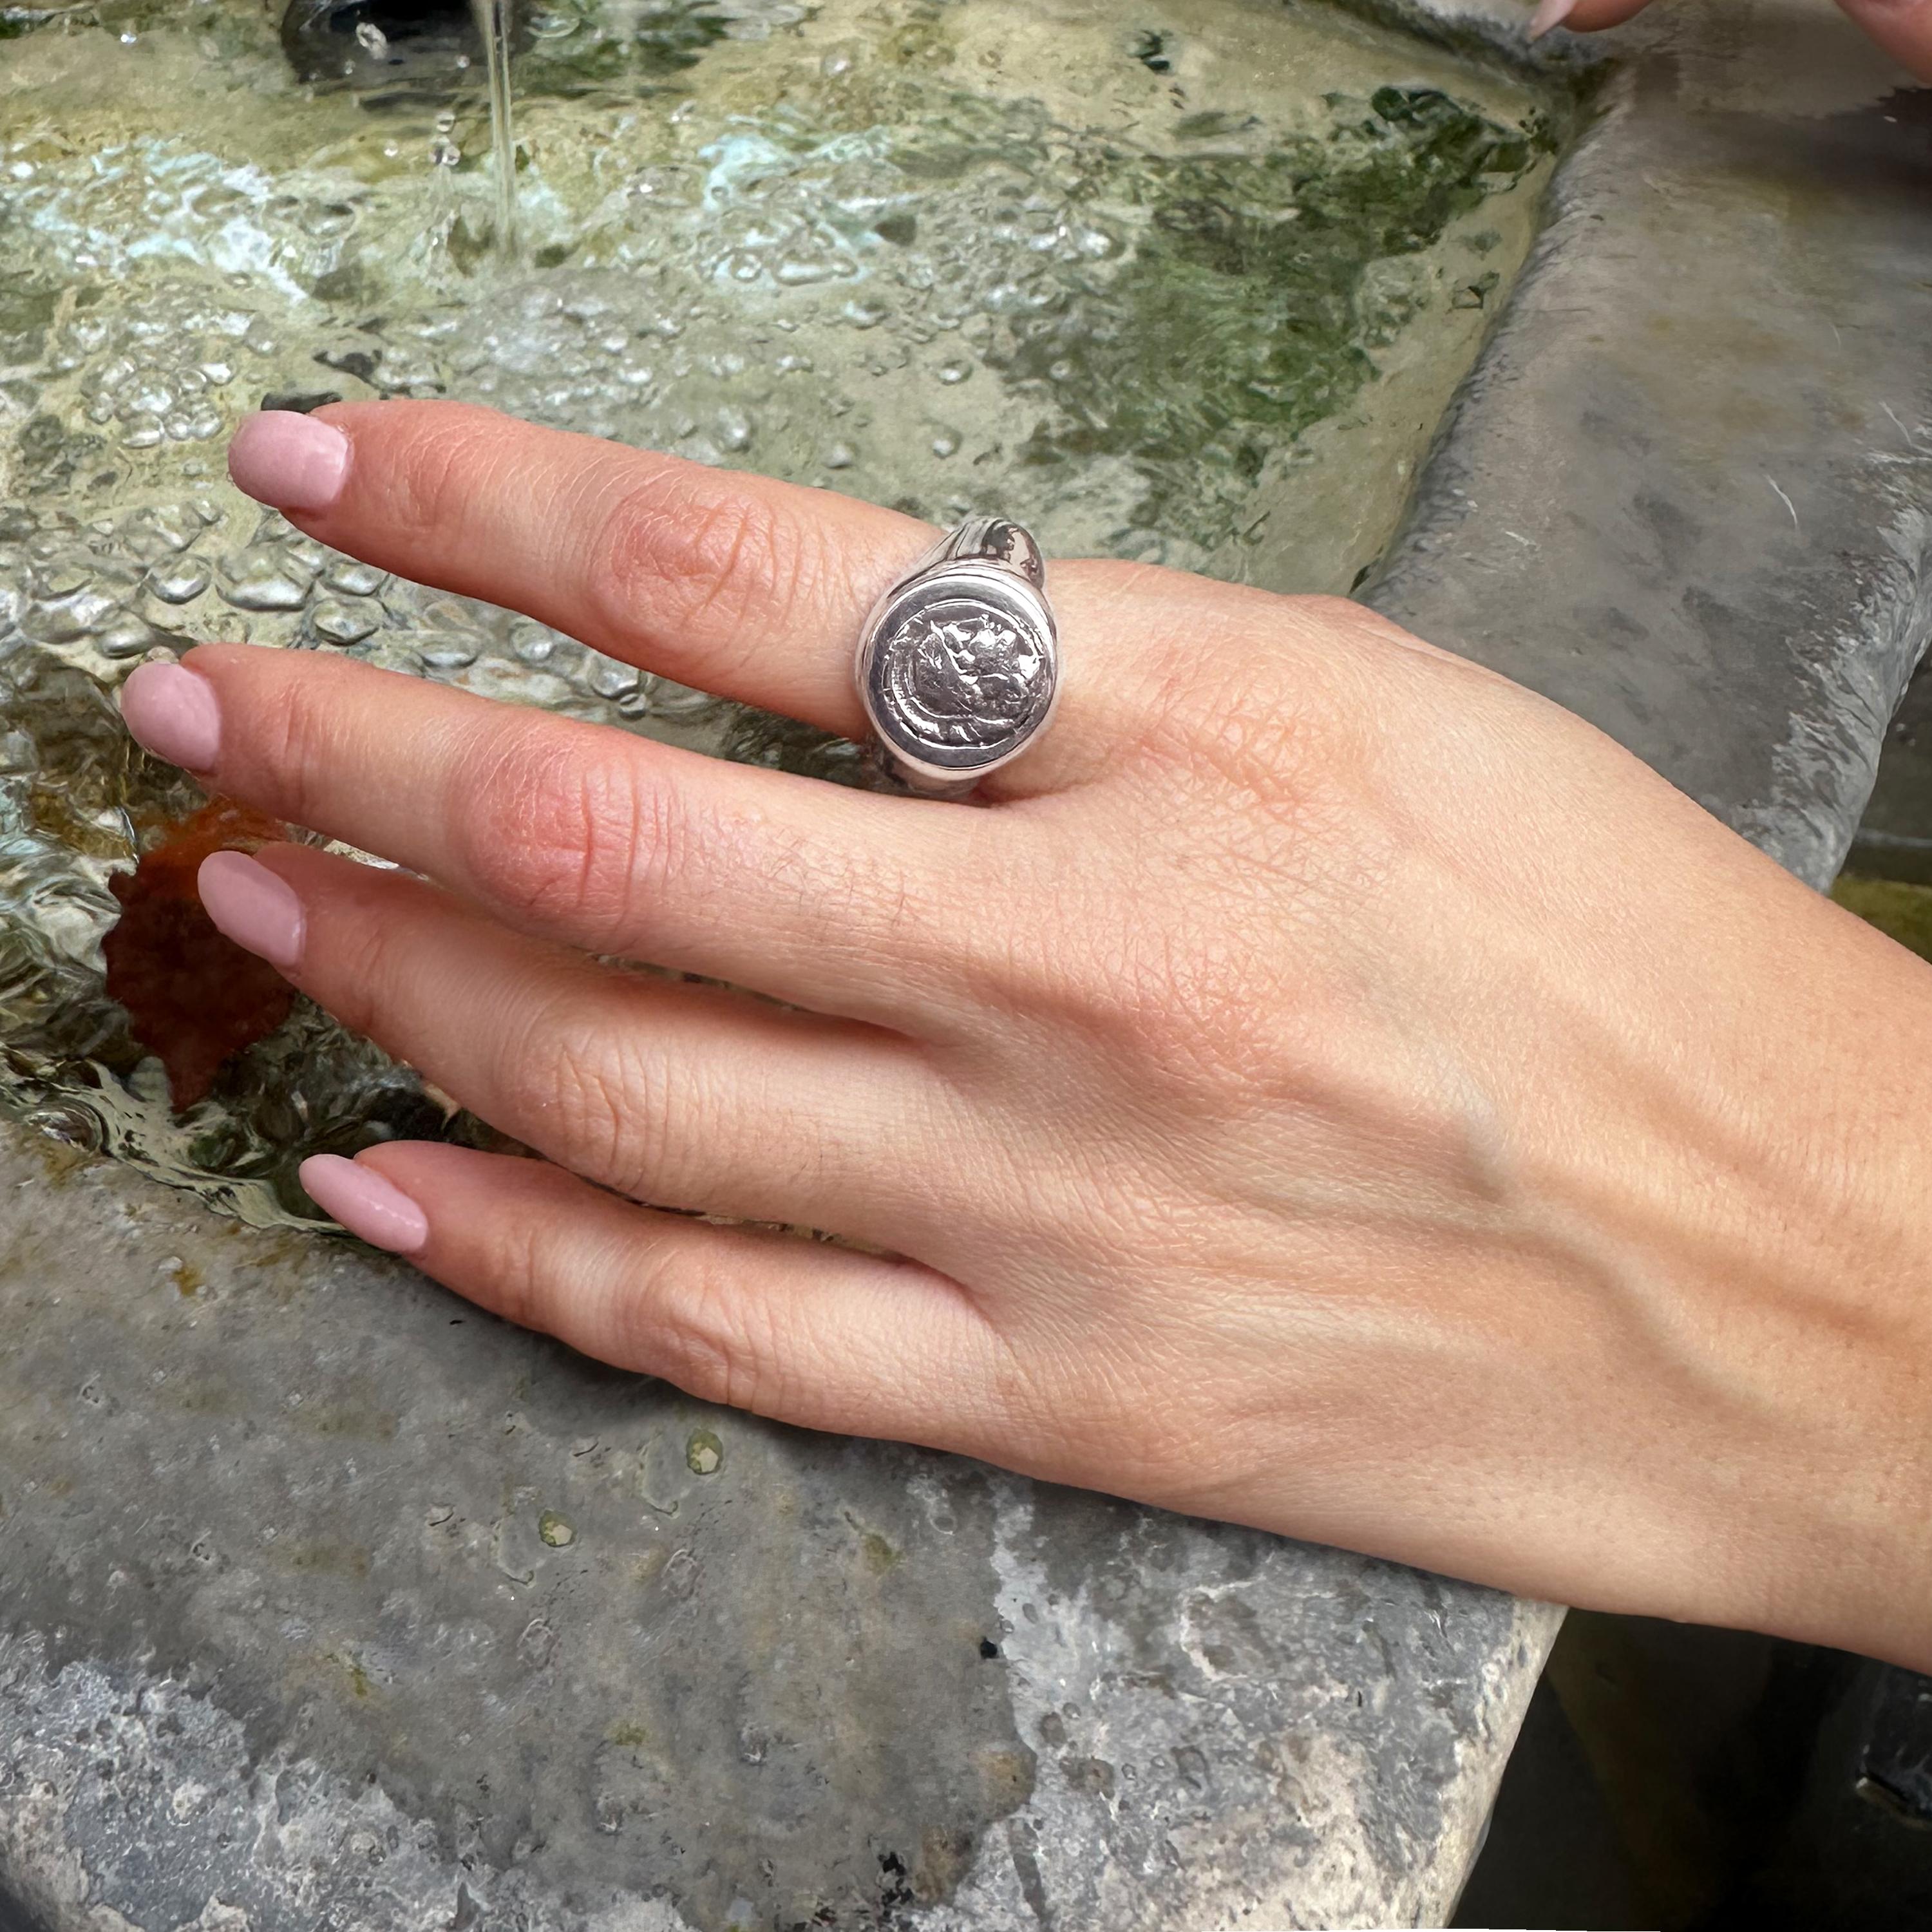 This sterling silver ring showcases an authentic Greek silver diobolus, sourced from an Athenian colony near Sybaris, founded in 443 BC. The coin's reverse side displays the image of a Bull.

Athena, one of the most renowned Greek Goddesses,